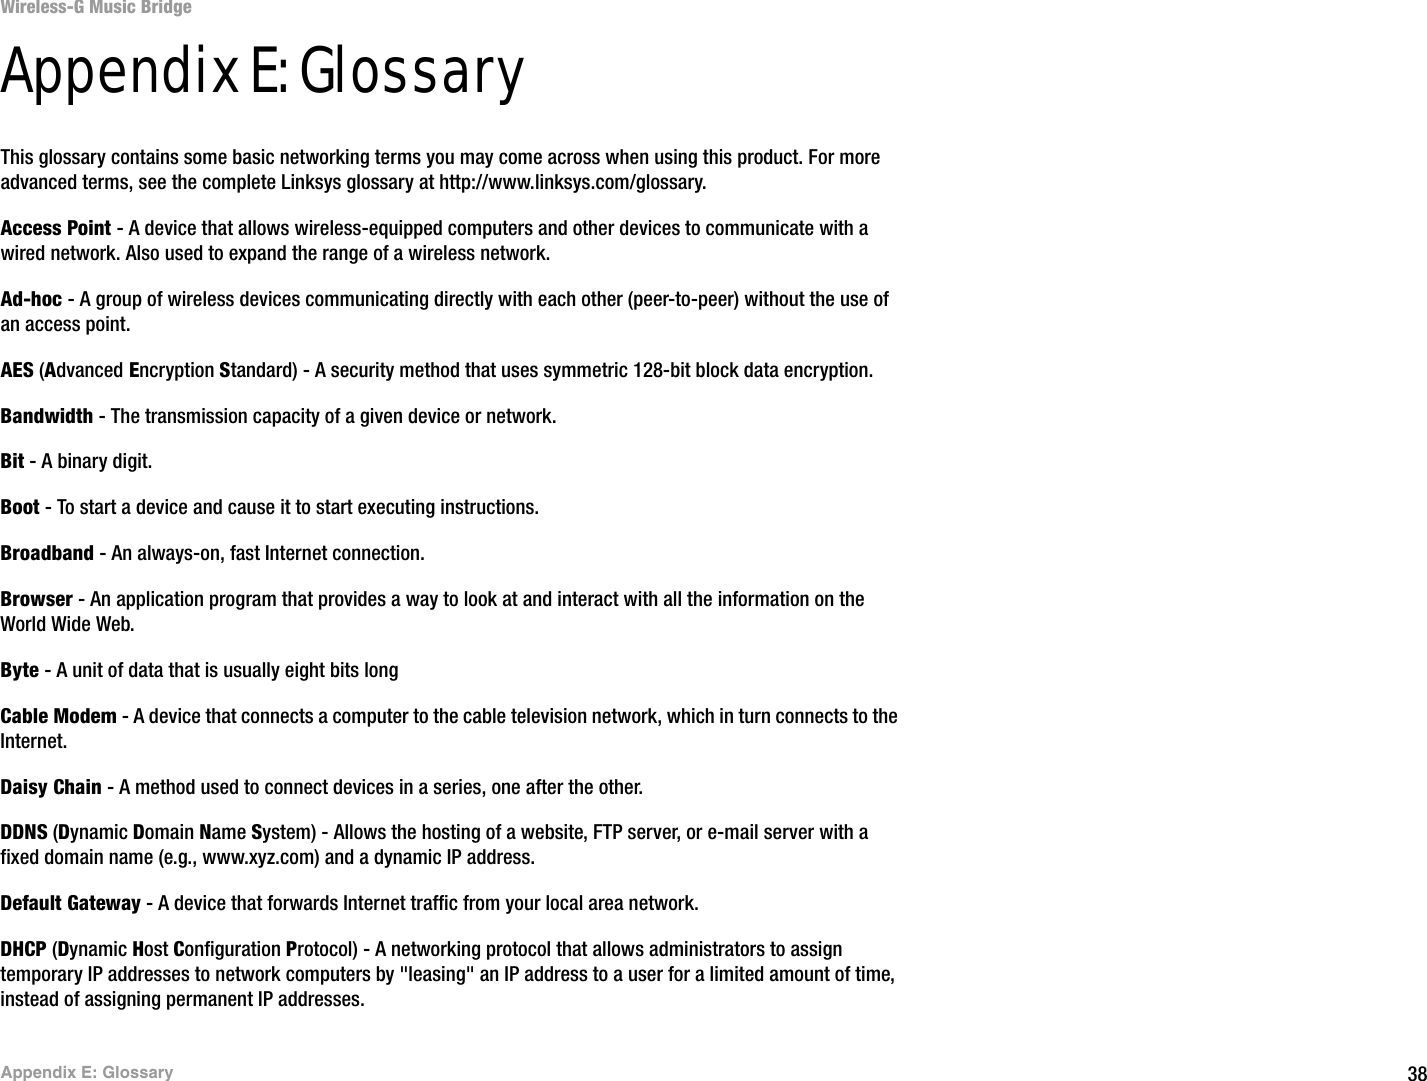 38Appendix E: GlossaryWireless-G Music BridgeAppendix E: GlossaryThis glossary contains some basic networking terms you may come across when using this product. For more advanced terms, see the complete Linksys glossary at http://www.linksys.com/glossary.Access Point - A device that allows wireless-equipped computers and other devices to communicate with a wired network. Also used to expand the range of a wireless network.Ad-hoc - A group of wireless devices communicating directly with each other (peer-to-peer) without the use of an access point.AES (Advanced Encryption Standard) - A security method that uses symmetric 128-bit block data encryption.Bandwidth - The transmission capacity of a given device or network.Bit - A binary digit.Boot - To start a device and cause it to start executing instructions.Broadband - An always-on, fast Internet connection.Browser - An application program that provides a way to look at and interact with all the information on the World Wide Web. Byte - A unit of data that is usually eight bits longCable Modem - A device that connects a computer to the cable television network, which in turn connects to the Internet.Daisy Chain - A method used to connect devices in a series, one after the other.DDNS (Dynamic Domain Name System) - Allows the hosting of a website, FTP server, or e-mail server with a fixed domain name (e.g., www.xyz.com) and a dynamic IP address.Default Gateway - A device that forwards Internet traffic from your local area network.DHCP (Dynamic Host Configuration Protocol) - A networking protocol that allows administrators to assign temporary IP addresses to network computers by &quot;leasing&quot; an IP address to a user for a limited amount of time, instead of assigning permanent IP addresses.